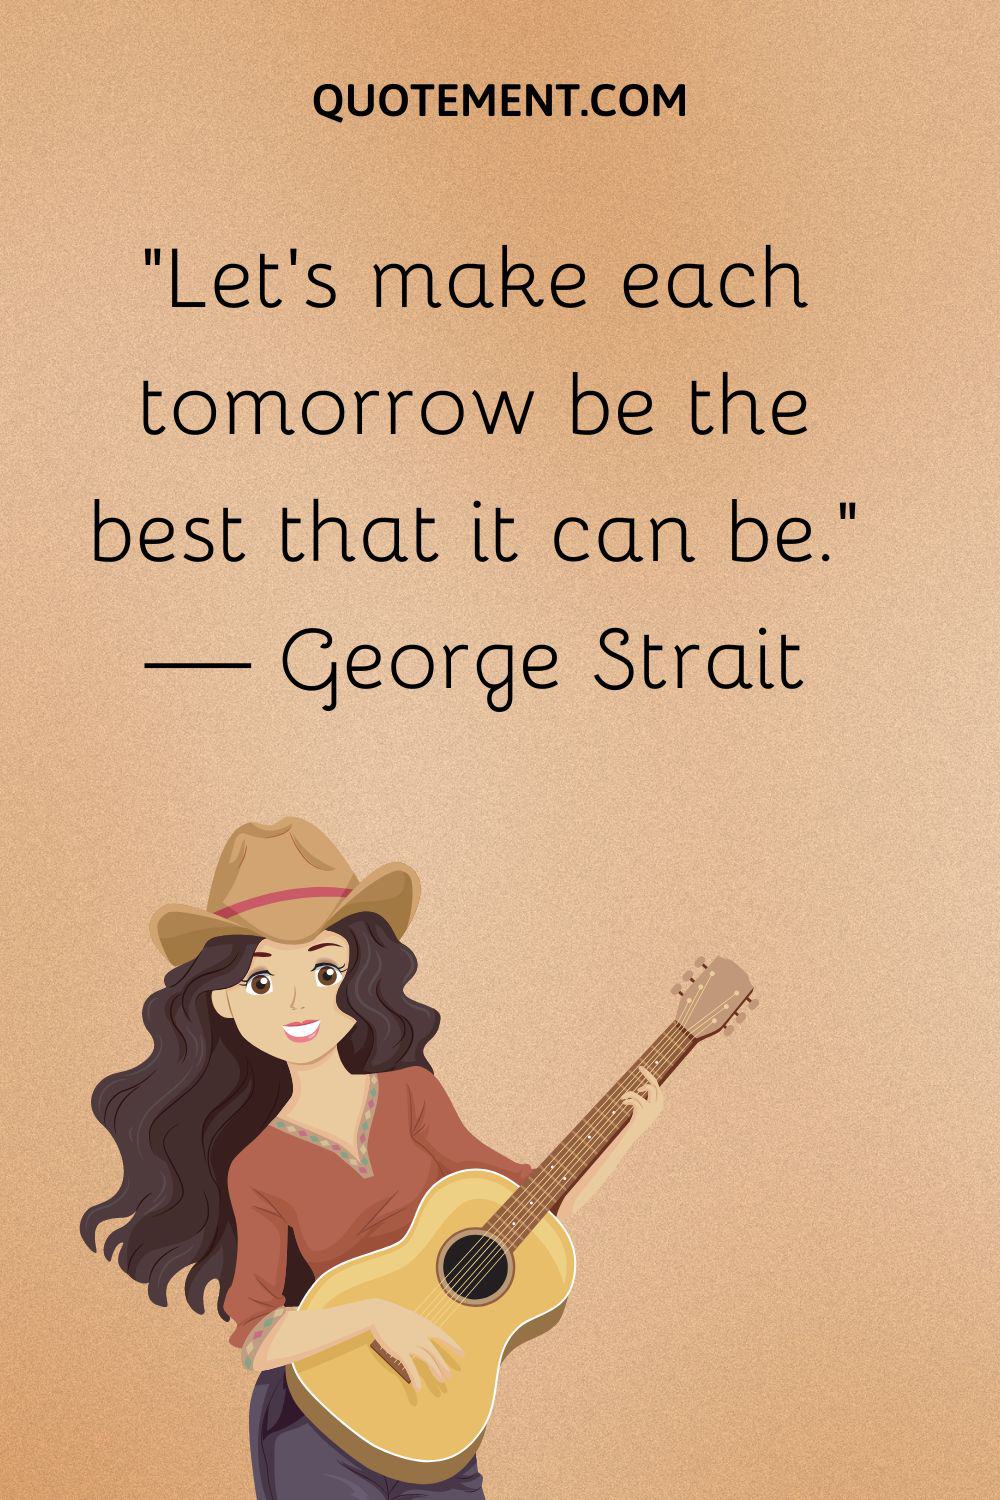 Let’s make each tomorrow be the best that it can be